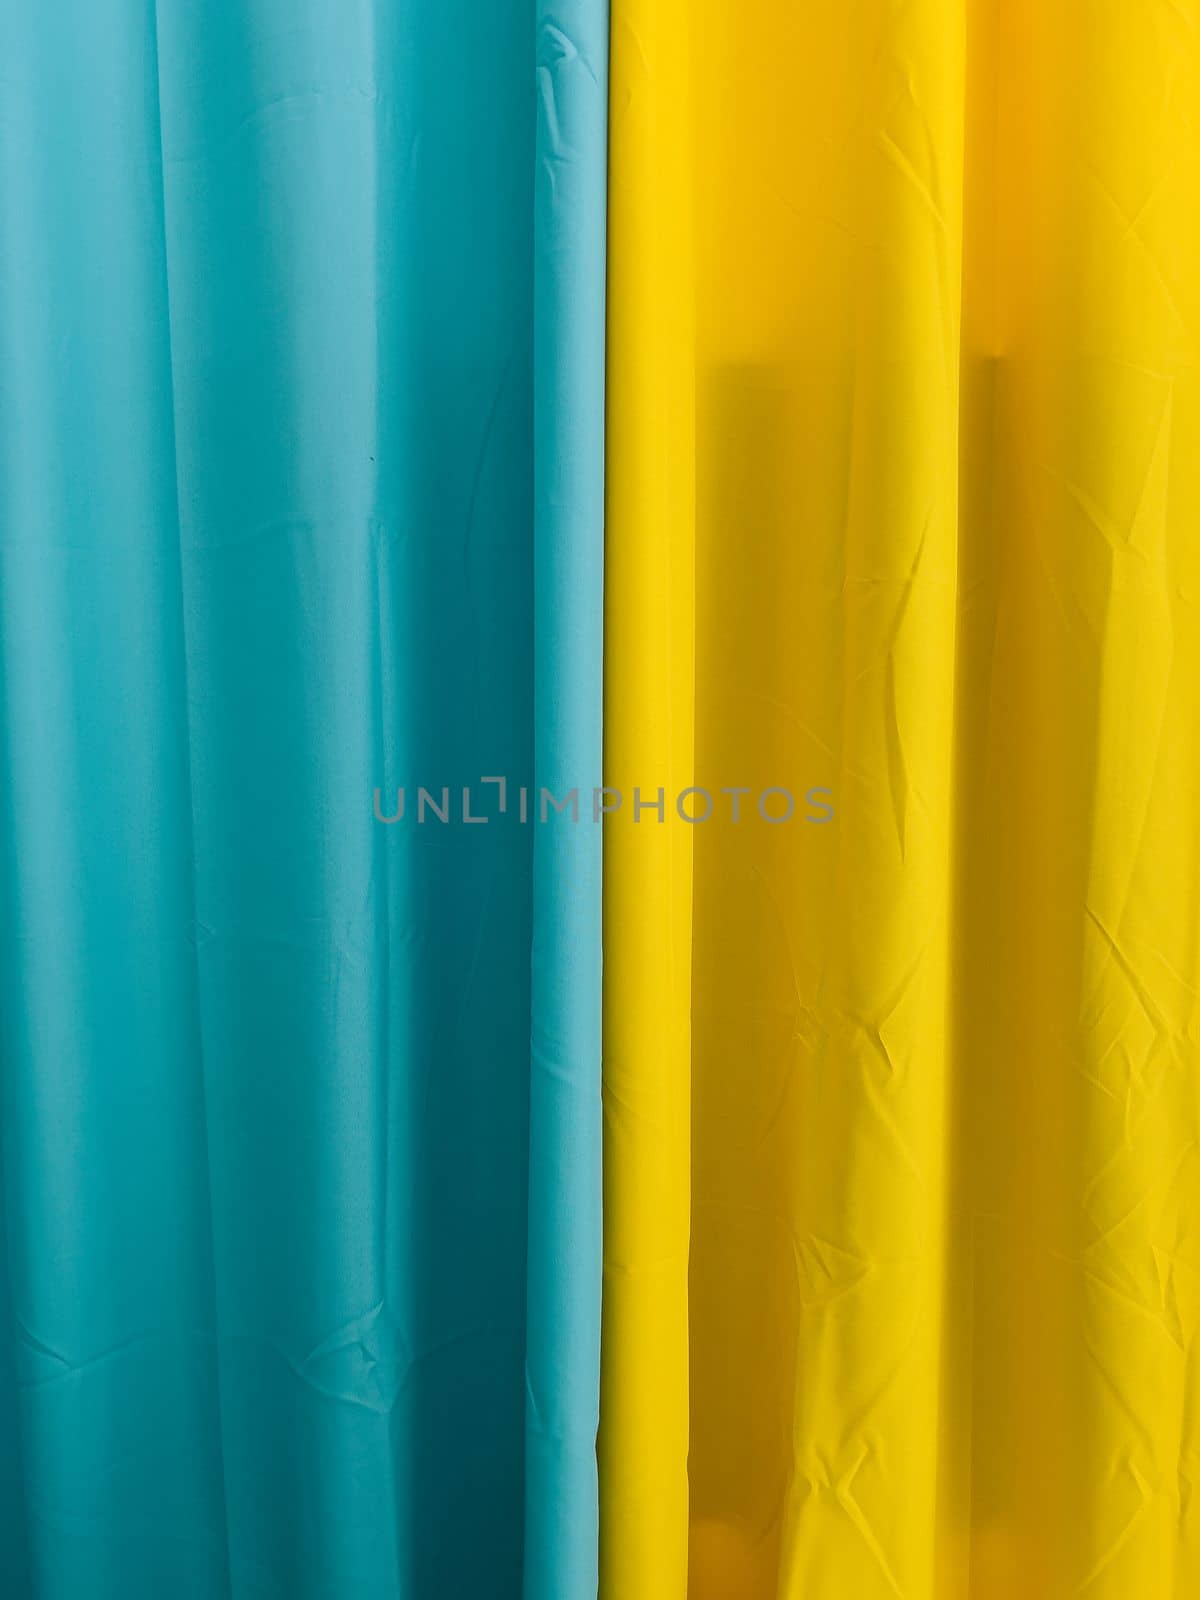 Blue and yellow textile curtains. Close-up by Nadtochiy